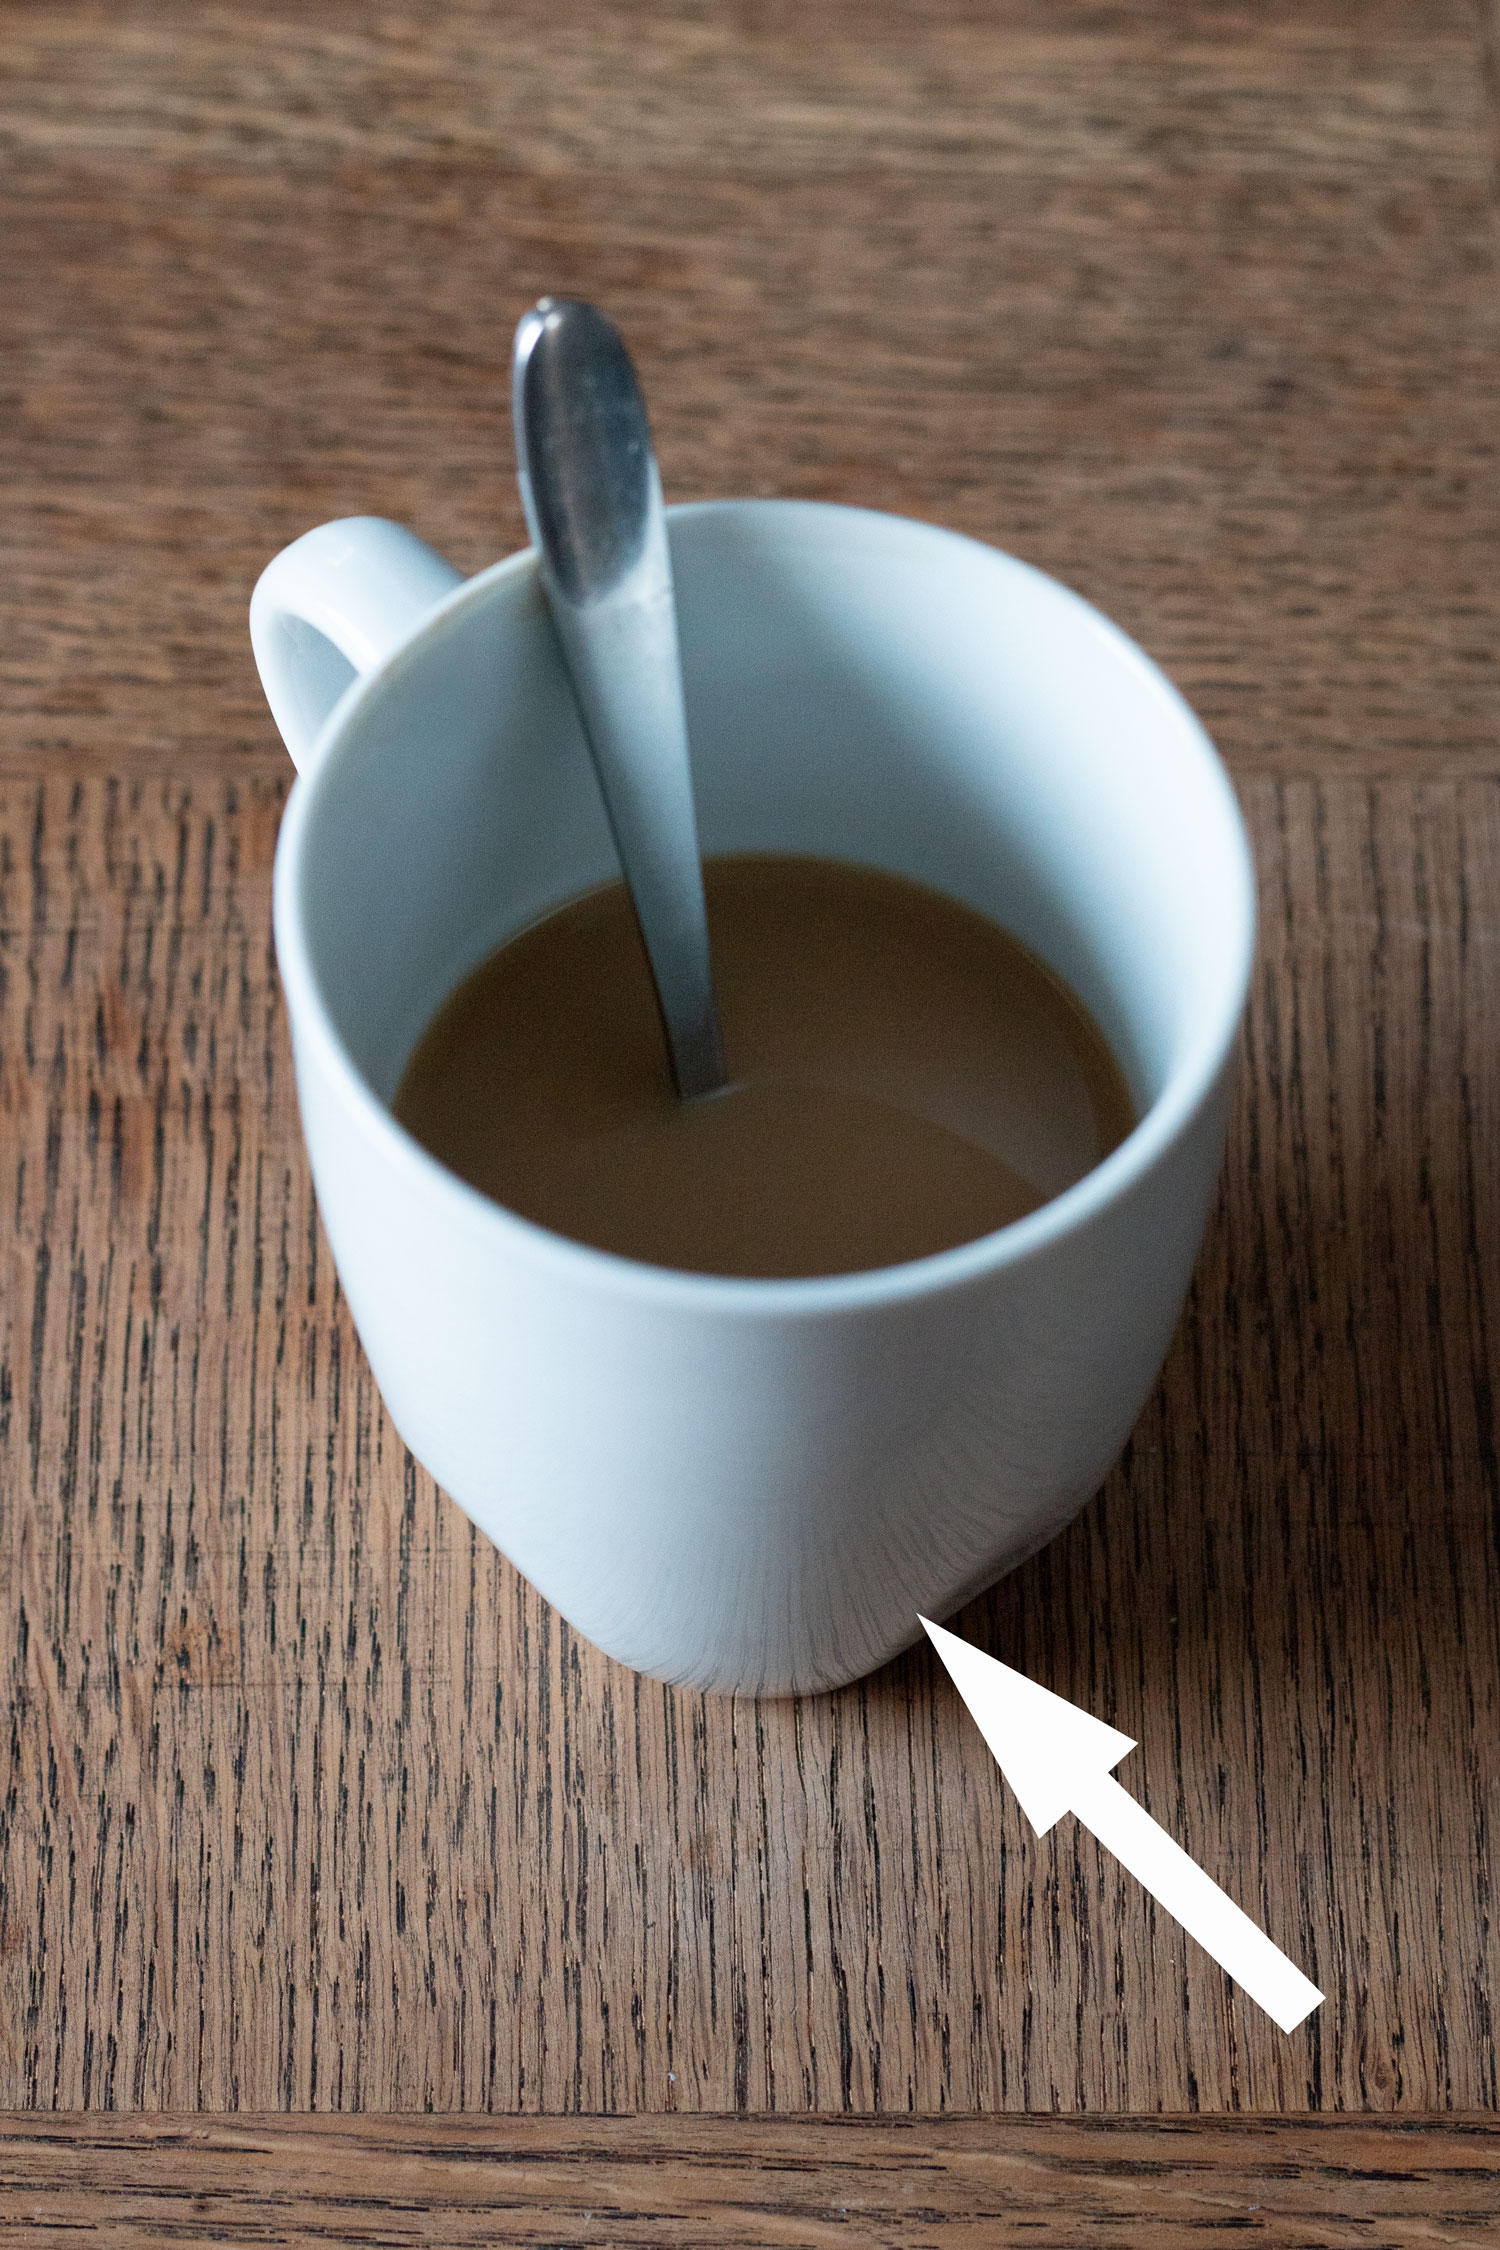 Example of fresnel effect on a cup